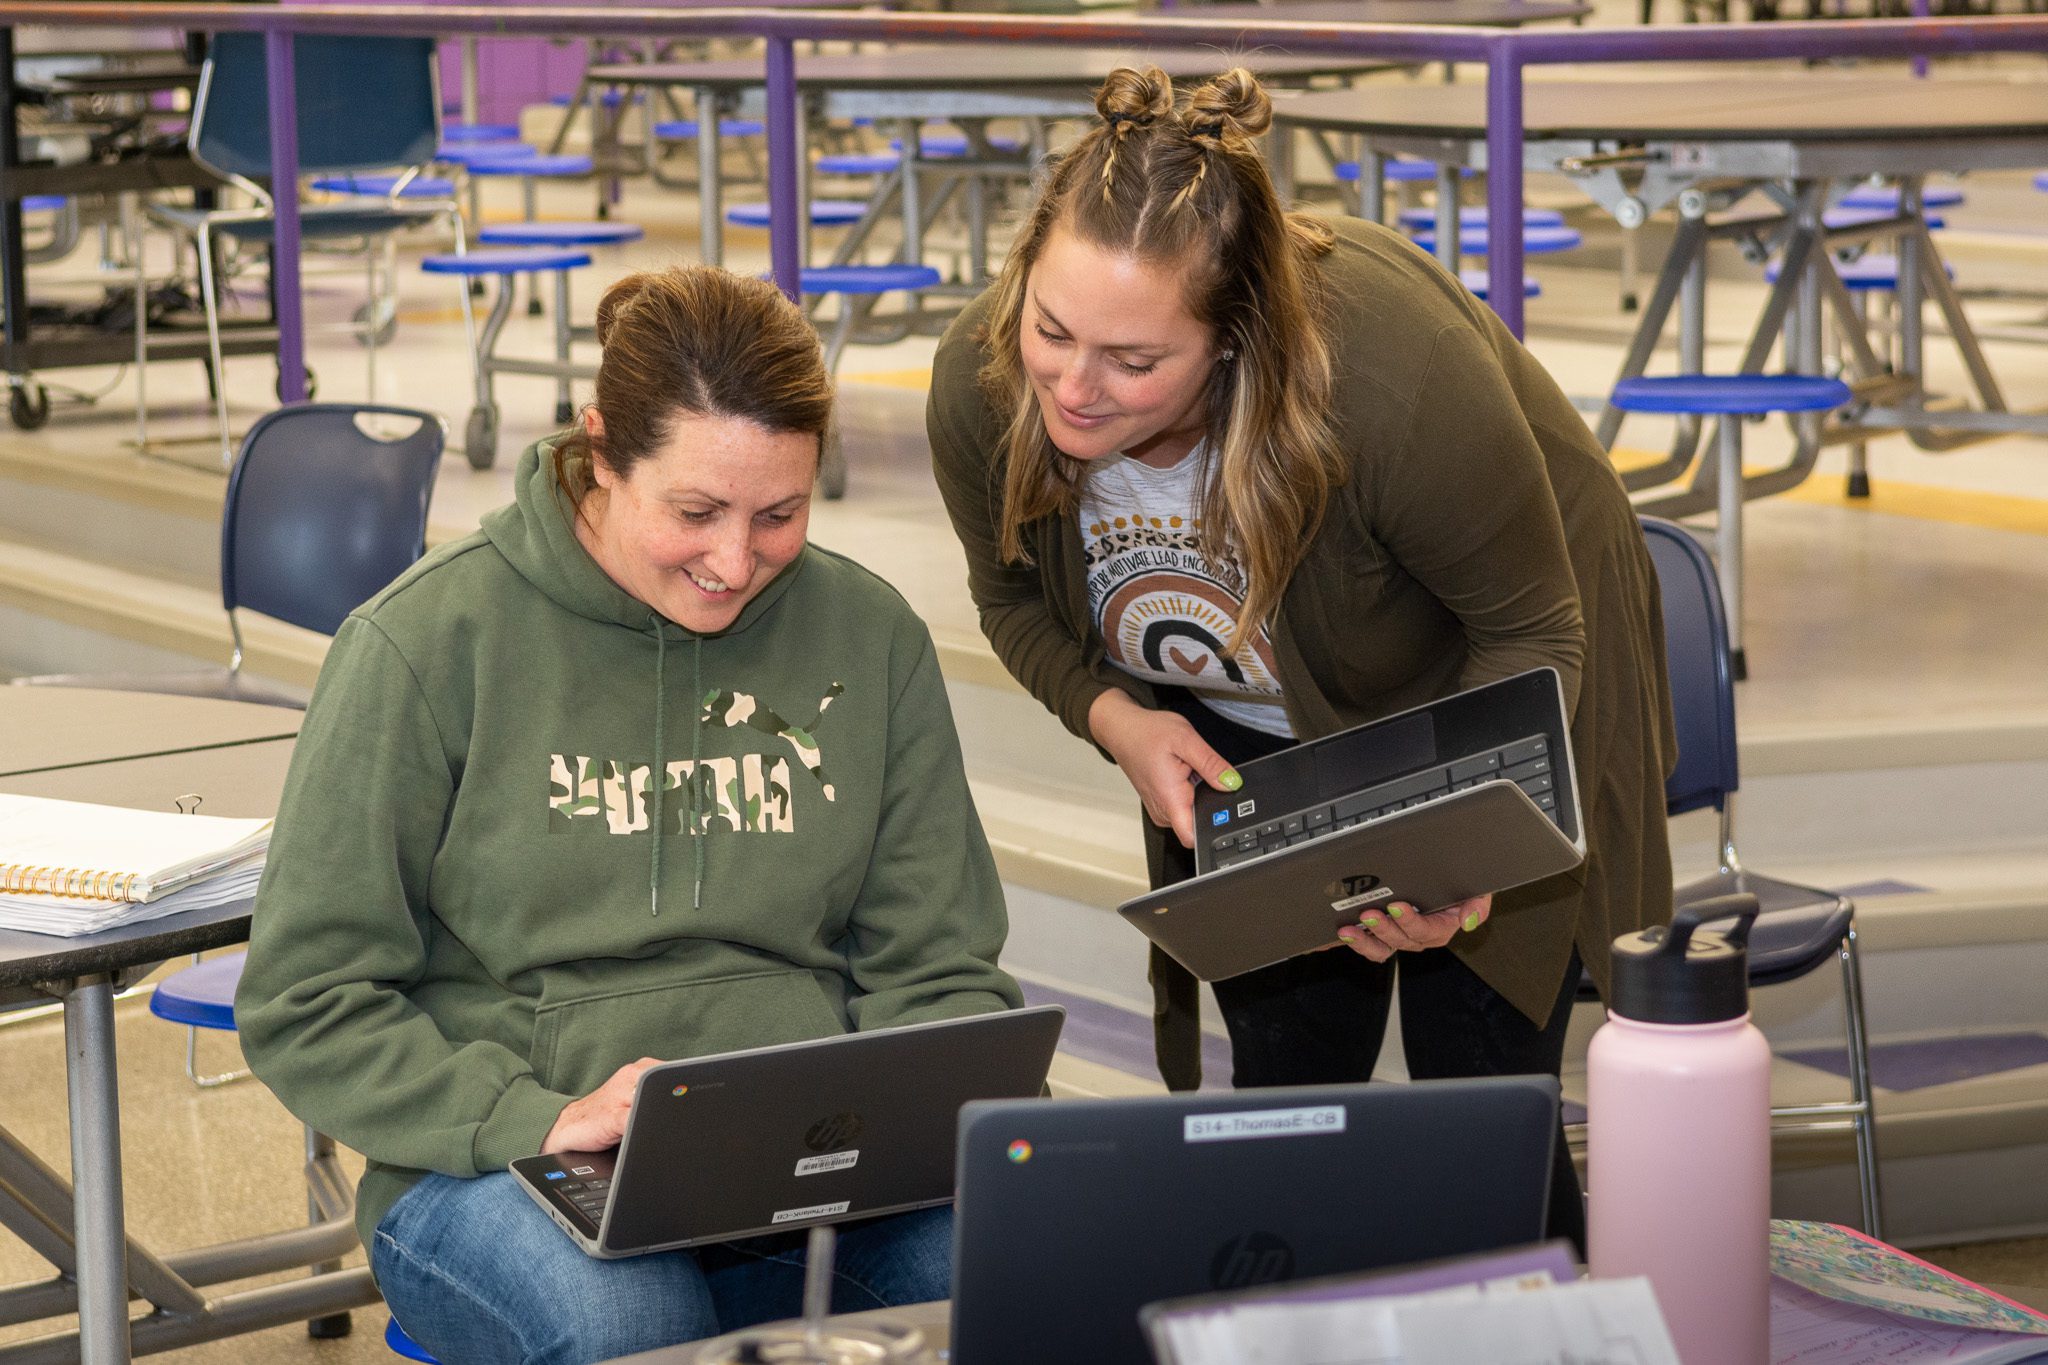 two female teachers working together with chromebooks in a school cafeteria.